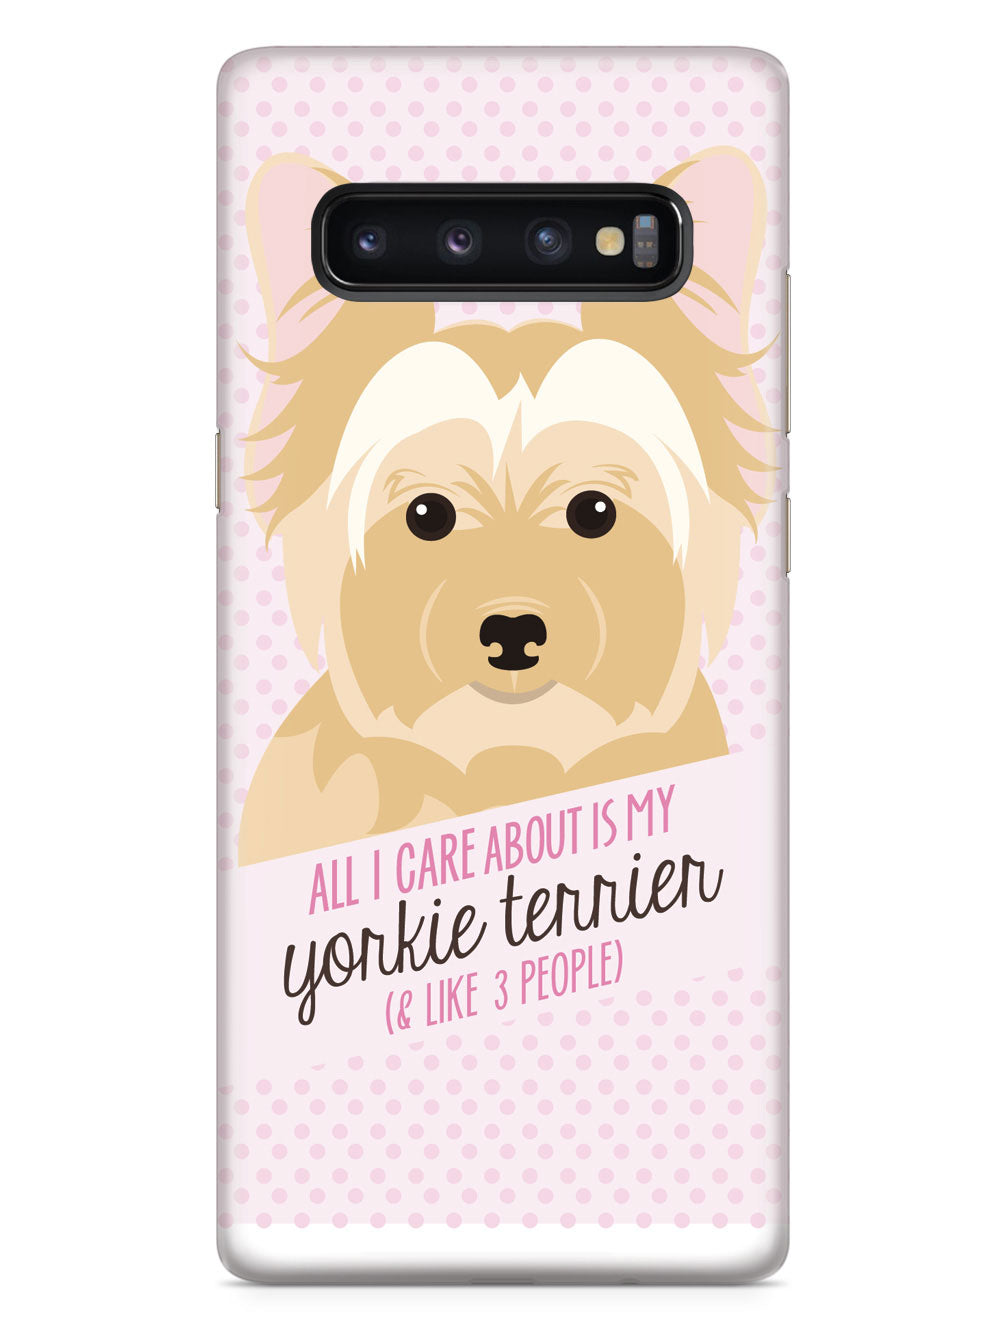 All I Care About Is My Yorkie Terrier Case